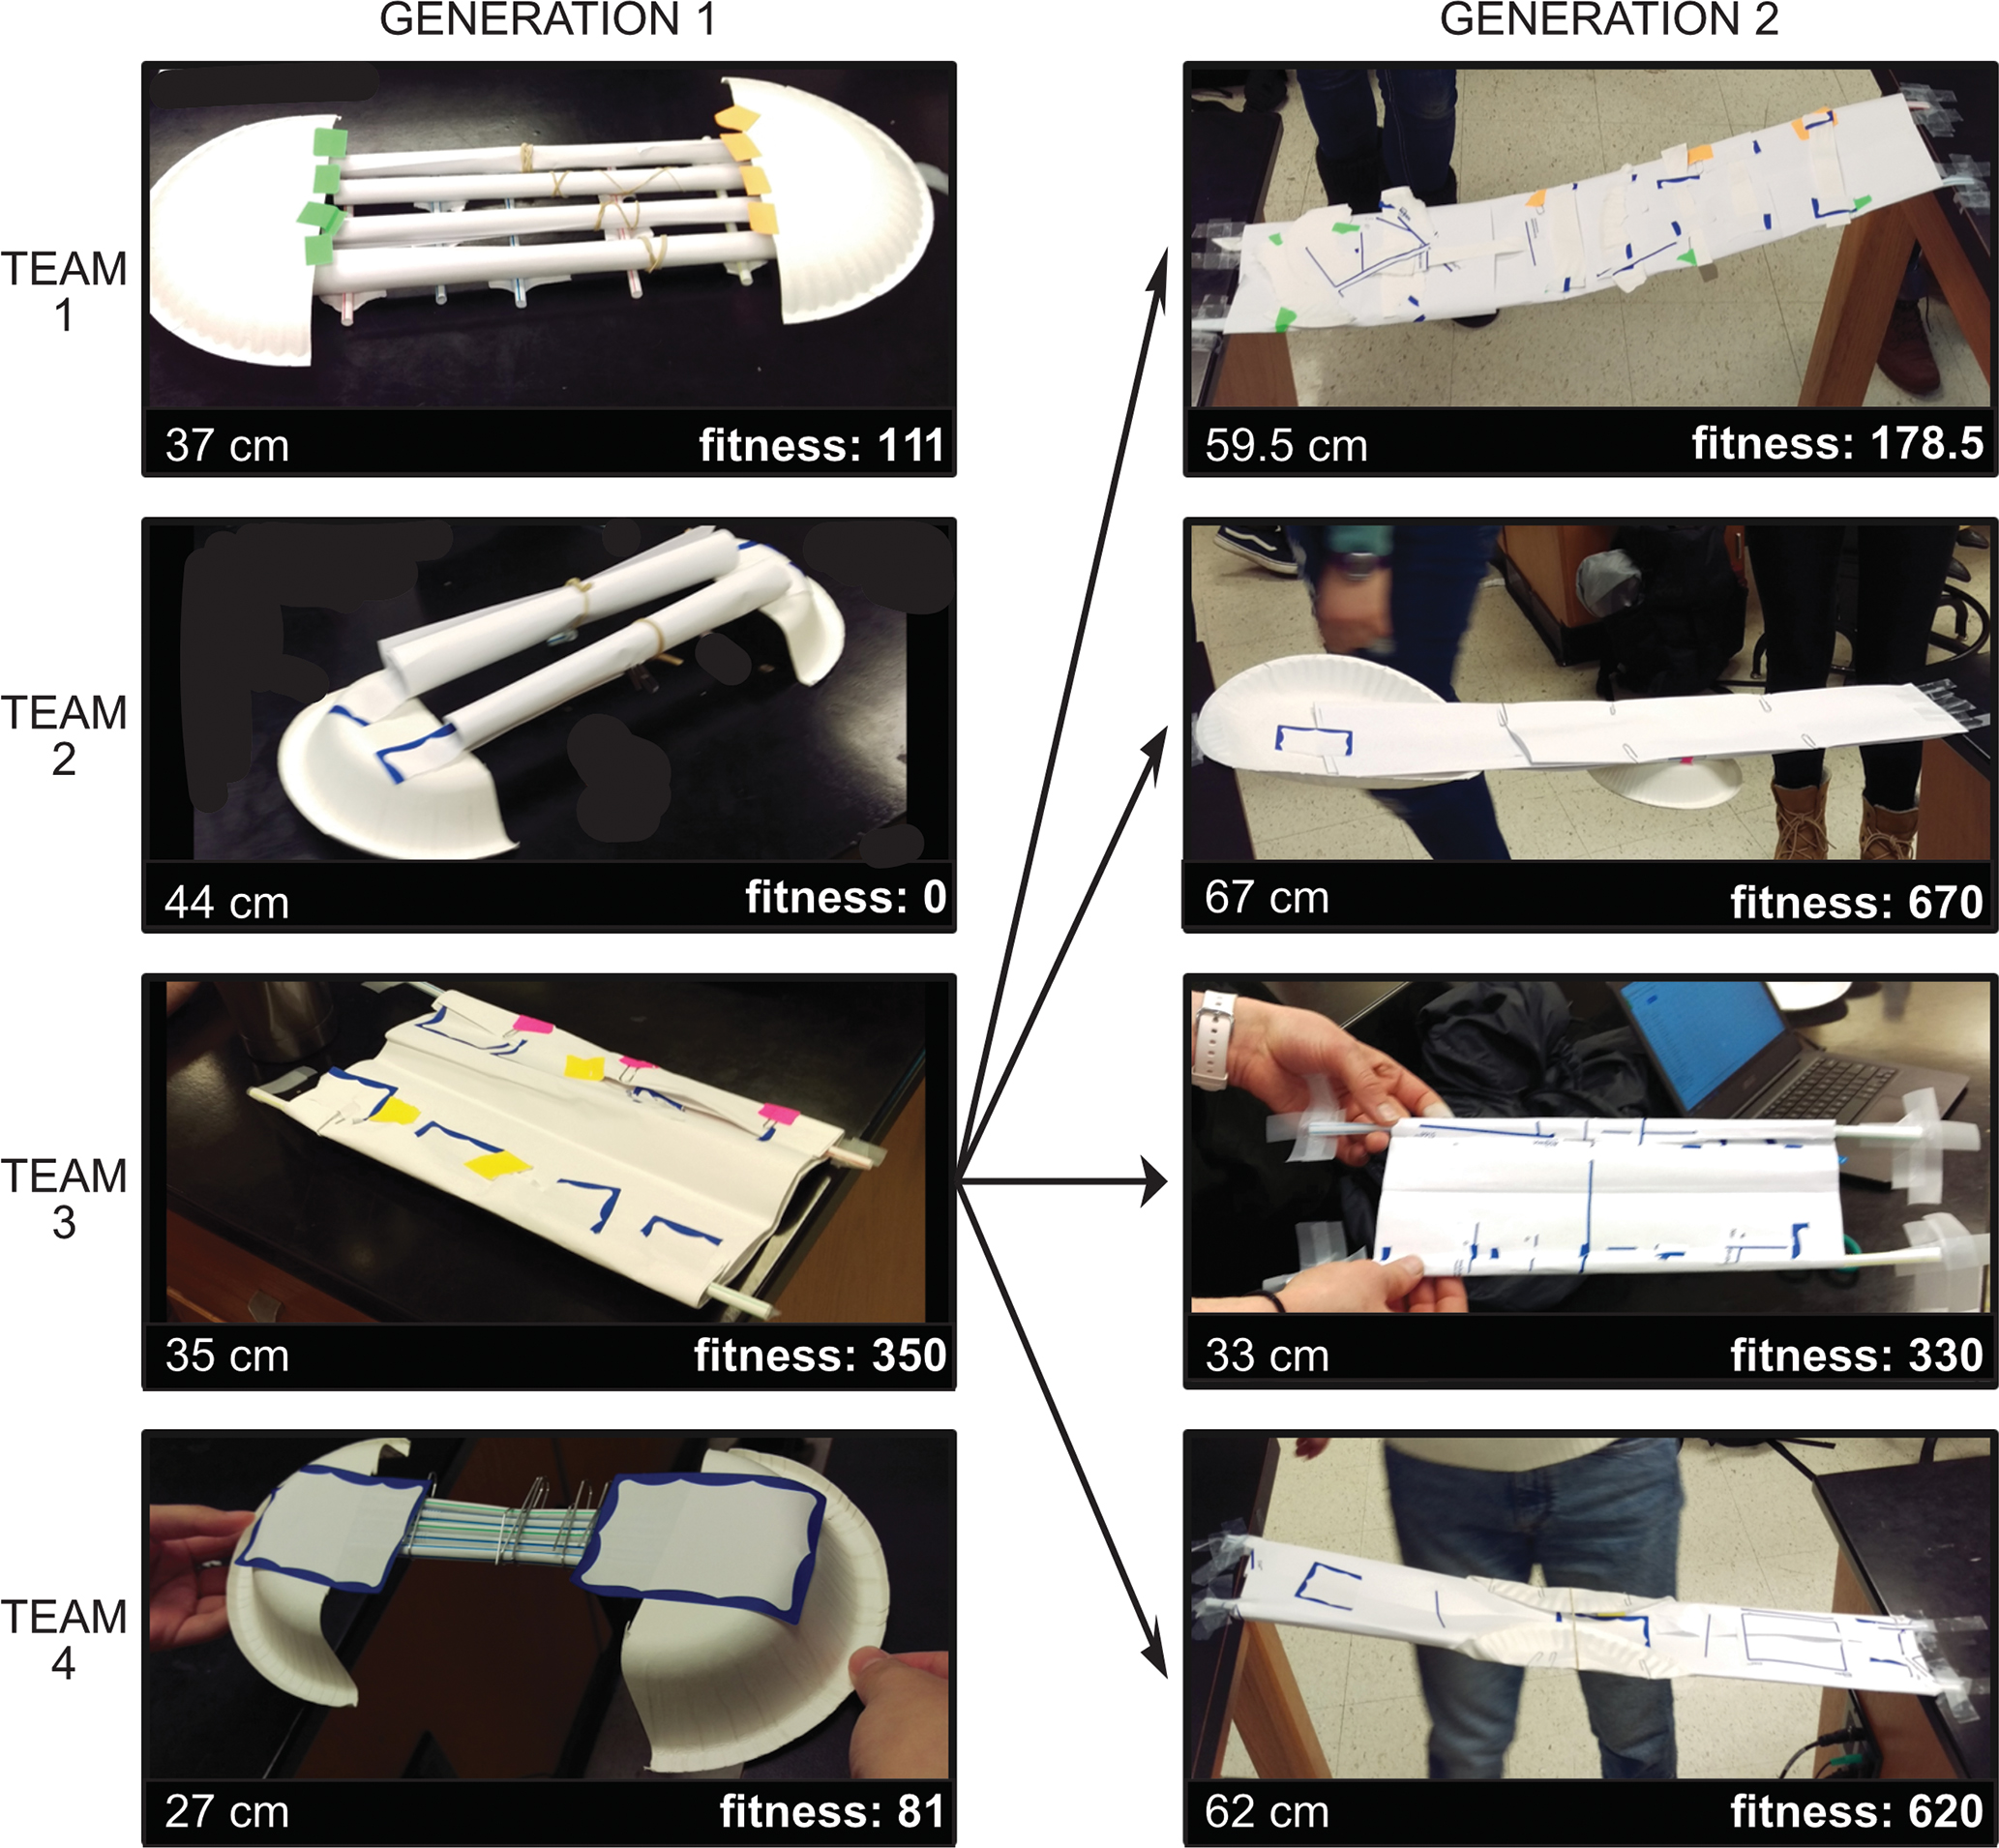 Example bridges from one lab section. Bridges are constructed from basic stationery supplies (see main text) and competed. The Generation 1 bridge with the highest fitness (length * load bearing score) is the template for Generation 2 bridges.